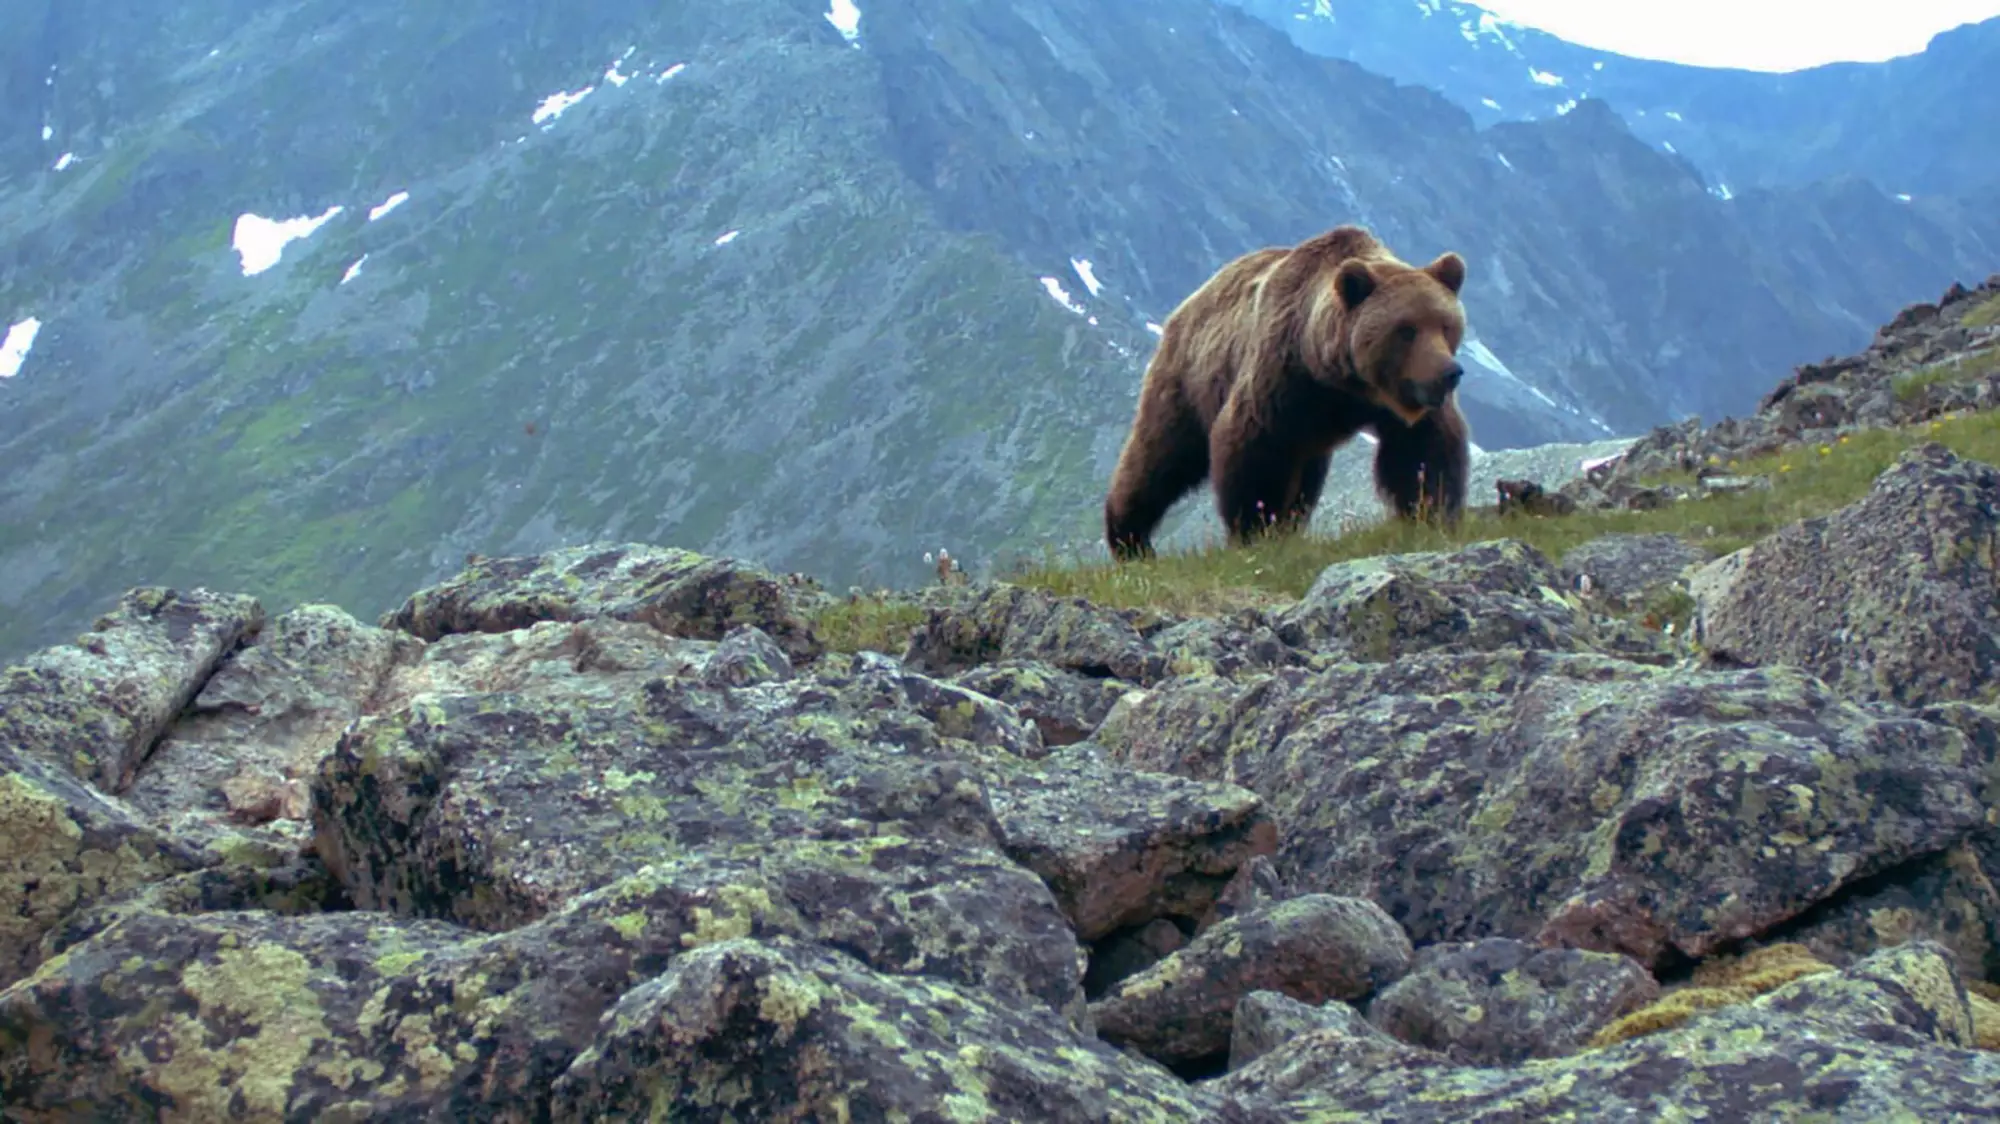 The bear reportedly pounced on the group while they were packing up their tents.